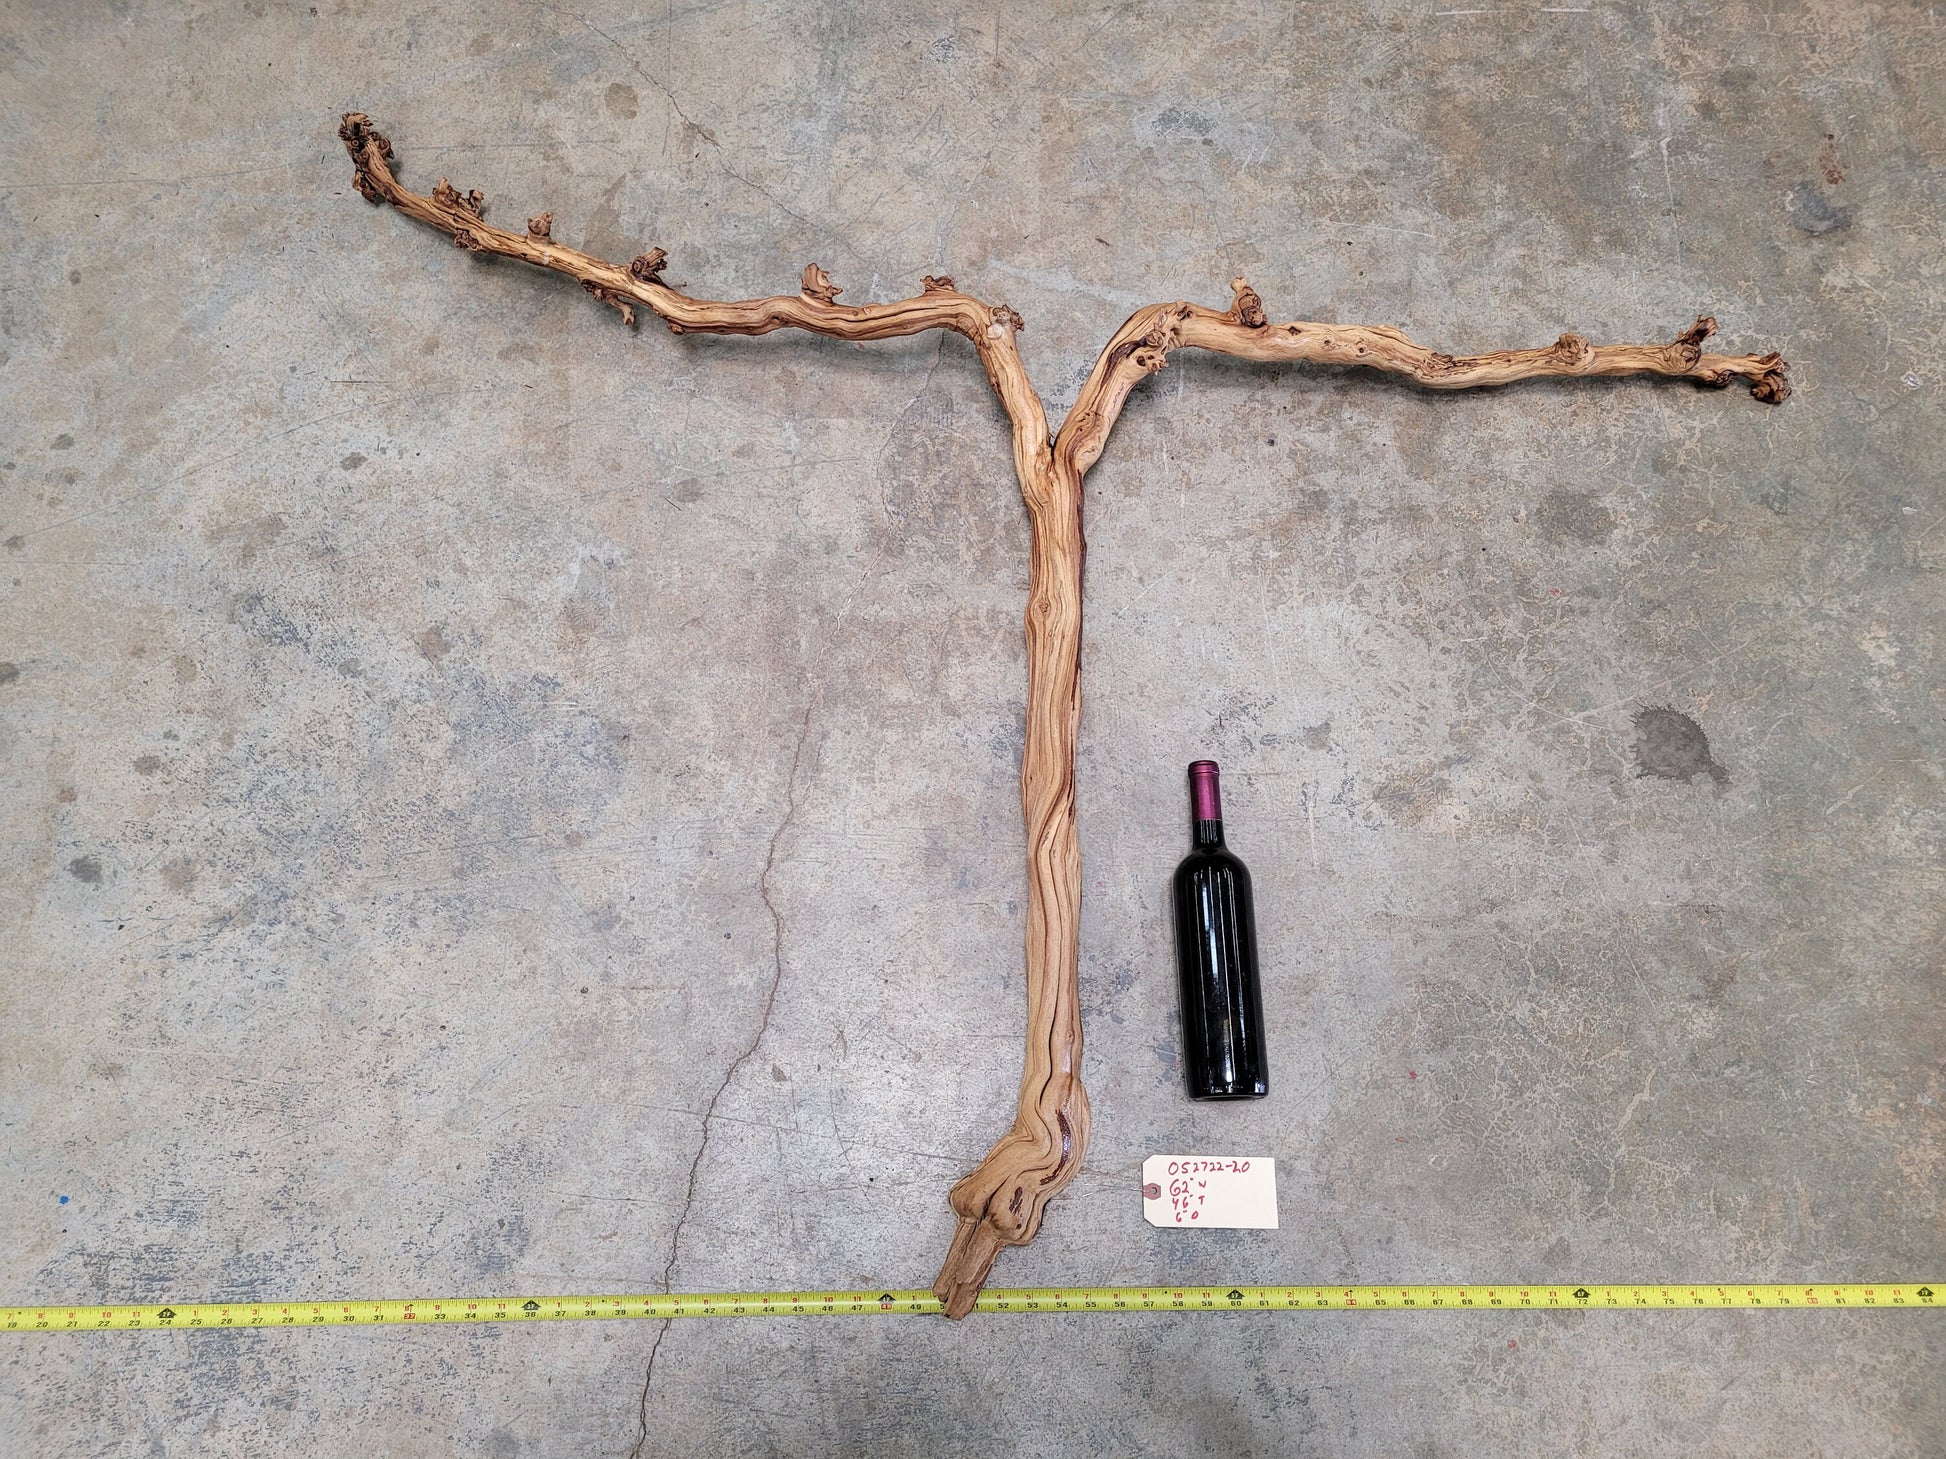 Grape Vine Art From Stags Leap made from retired Napa Petit Sirah grapevine - 100% Recycled! 052722-20